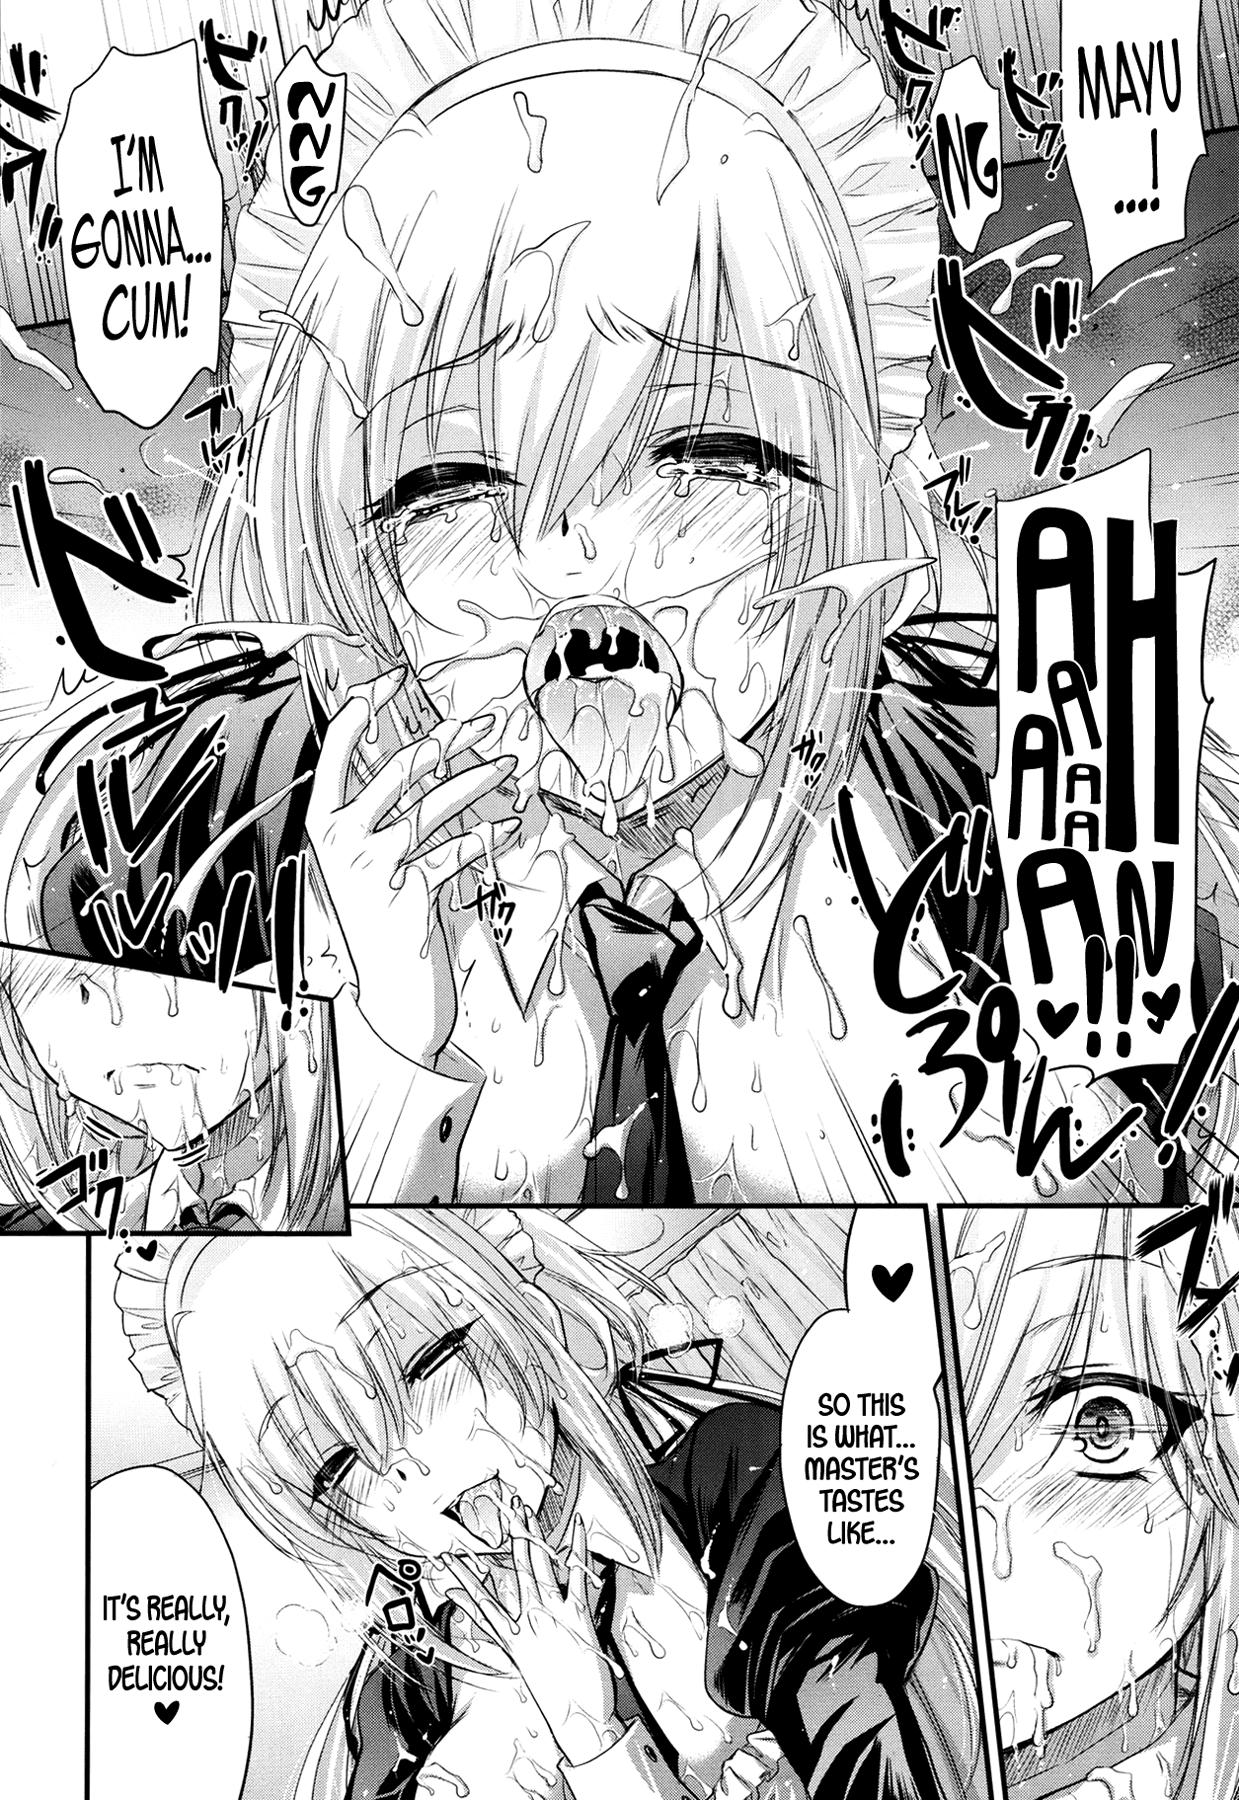 Best Blow Job Ever 21 Seiki ★ Maid | 21 Century ★ Maid Step Sister - Page 8